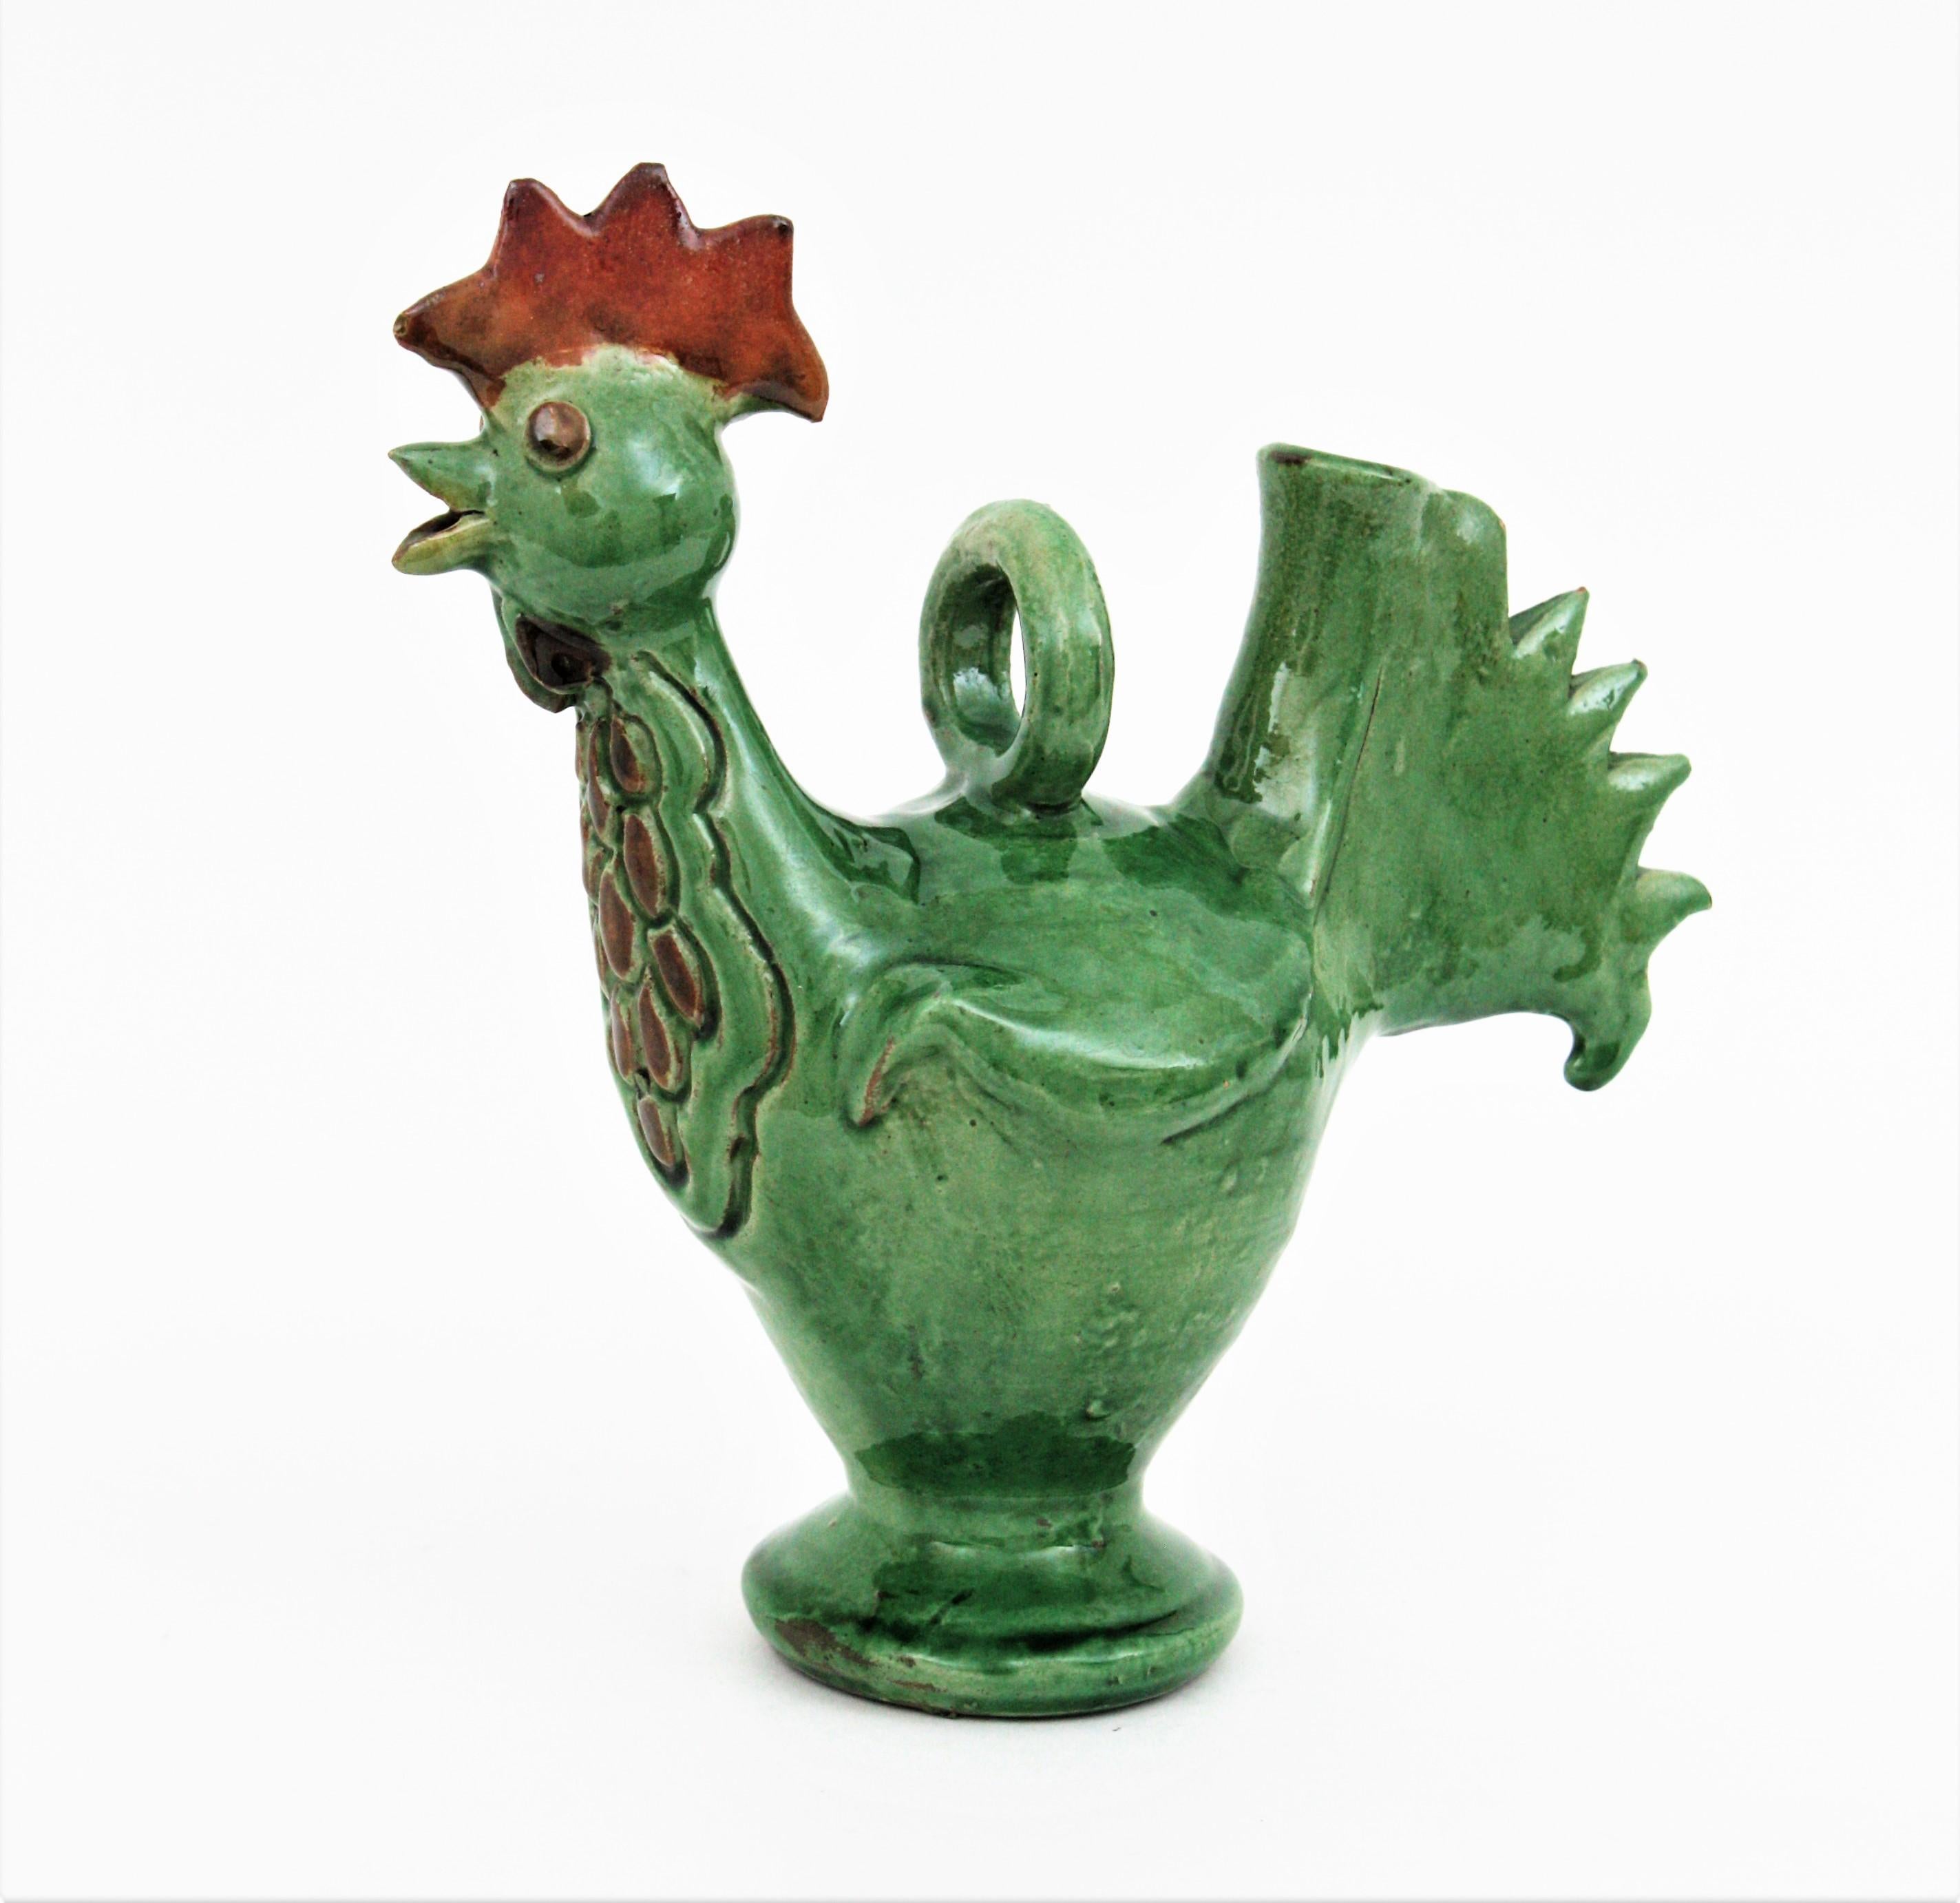 Eye-catching green and brown Majolica ceramic rooster jug / pitcher, Spain, 1950s.
Andalusian ceramic decorative rooster shaped jug in shades of green with brown accents.
A cool accent to any kitchen or to be user as serving pitcher. Lovely as a